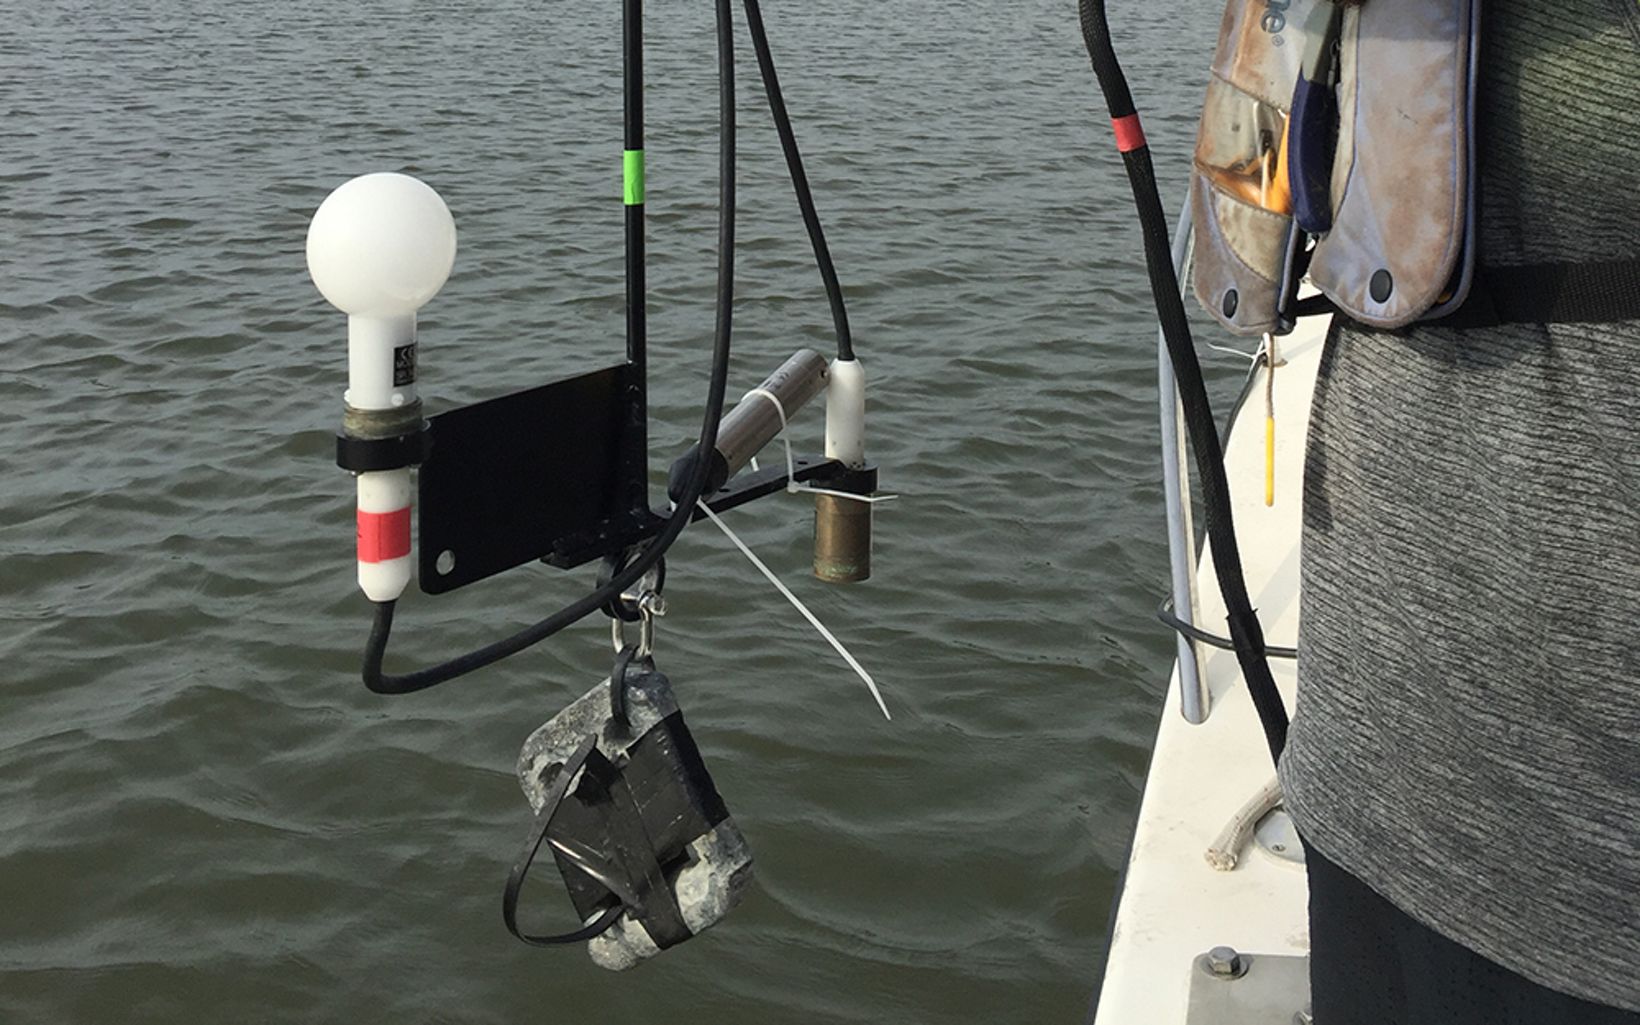 Light Sensor Scientists lower this sensor over the side of the boat to determine both how much light is being absorbed and how much is being scattered by particles in the water. © TNC